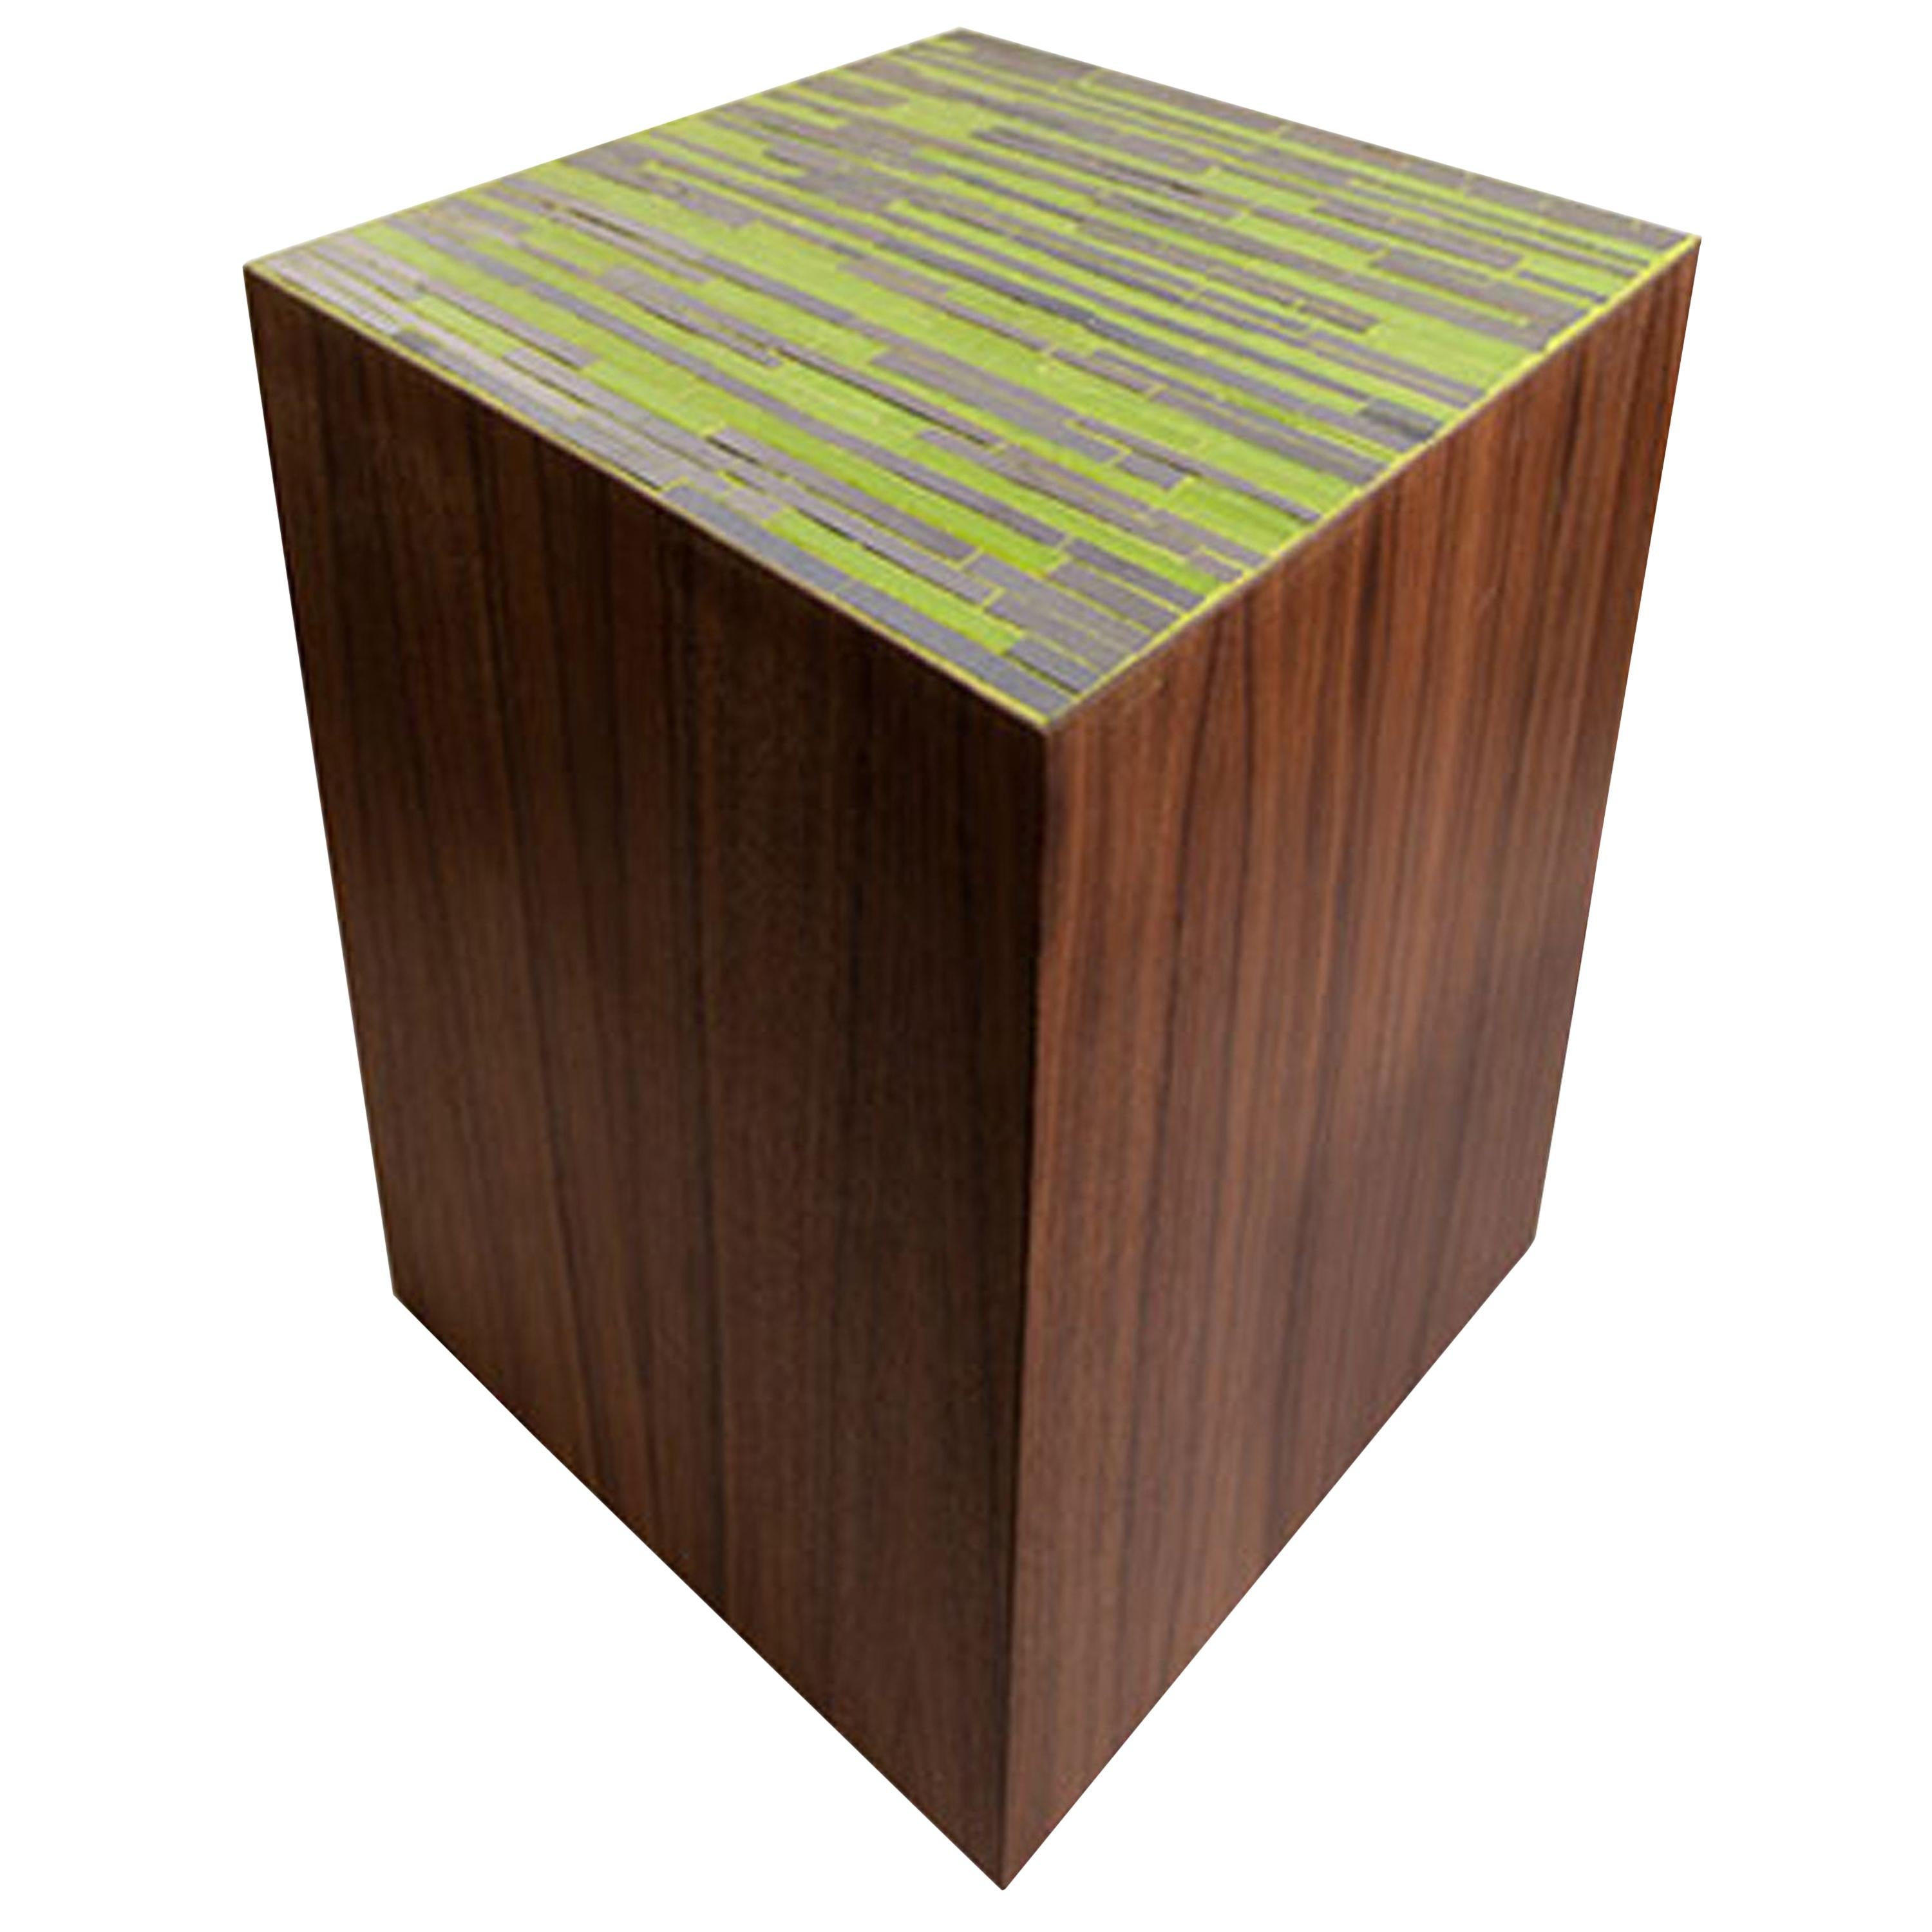 Customizable Natura Brown Walnut Pedestal in Channel Glass Mosaic by Ercole Home